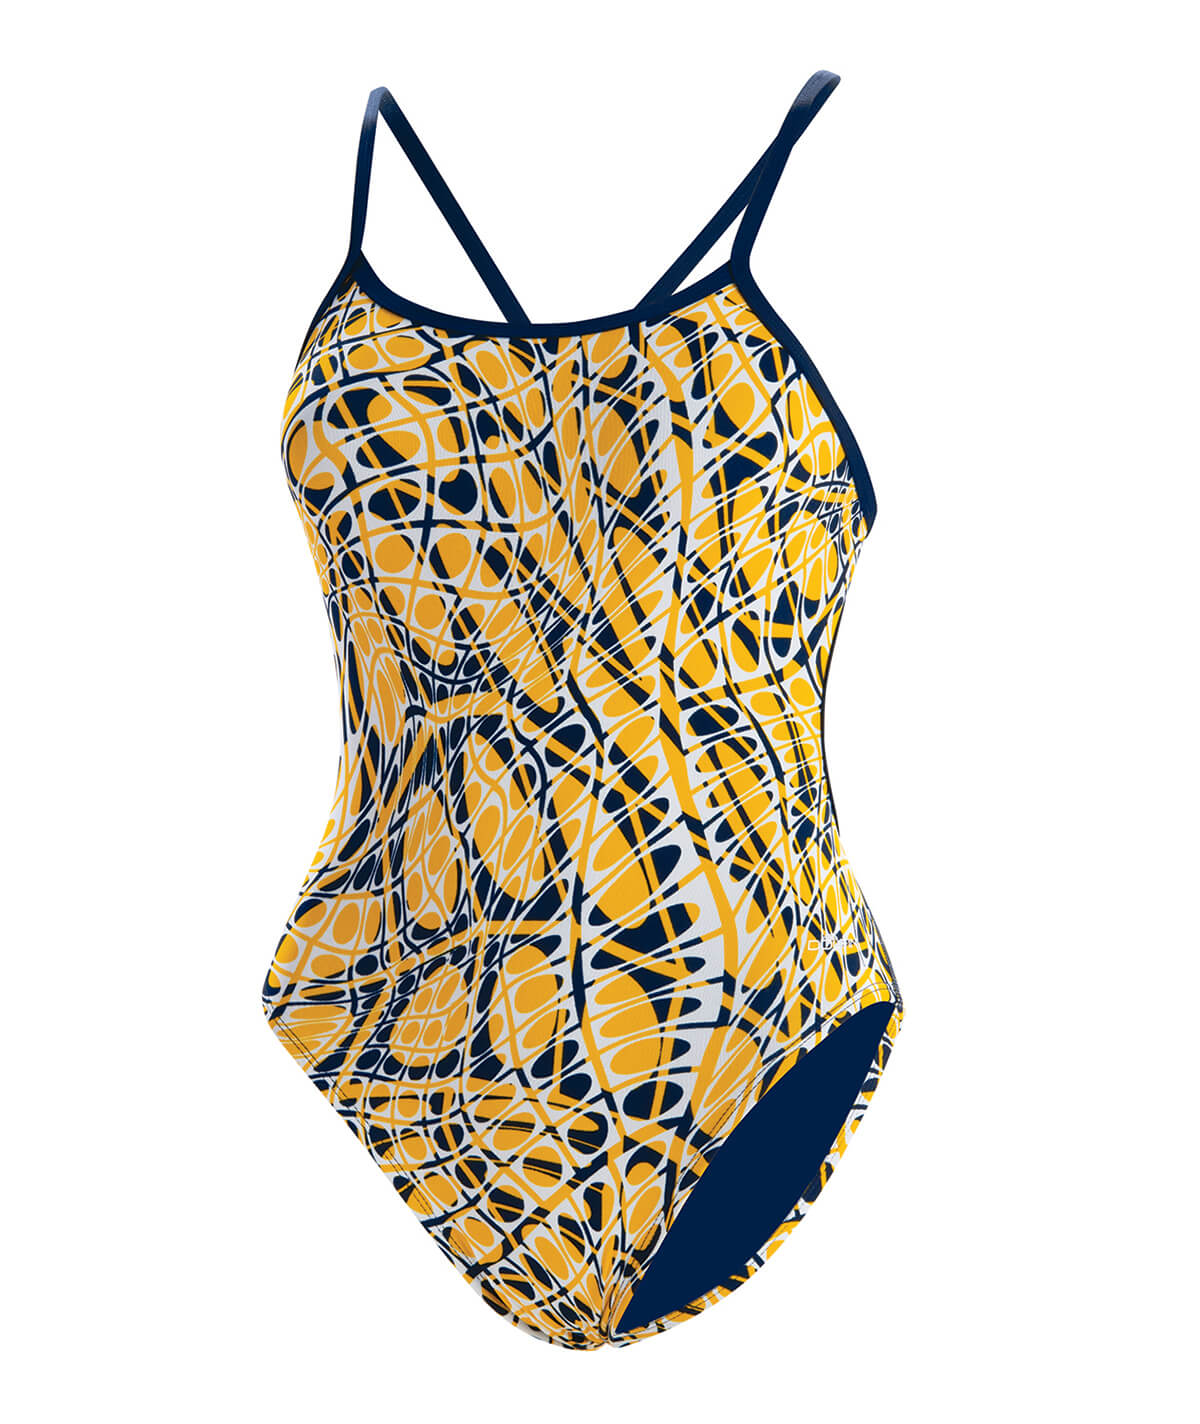 Women's Reliance Energy String Back One Piece Swimsuit